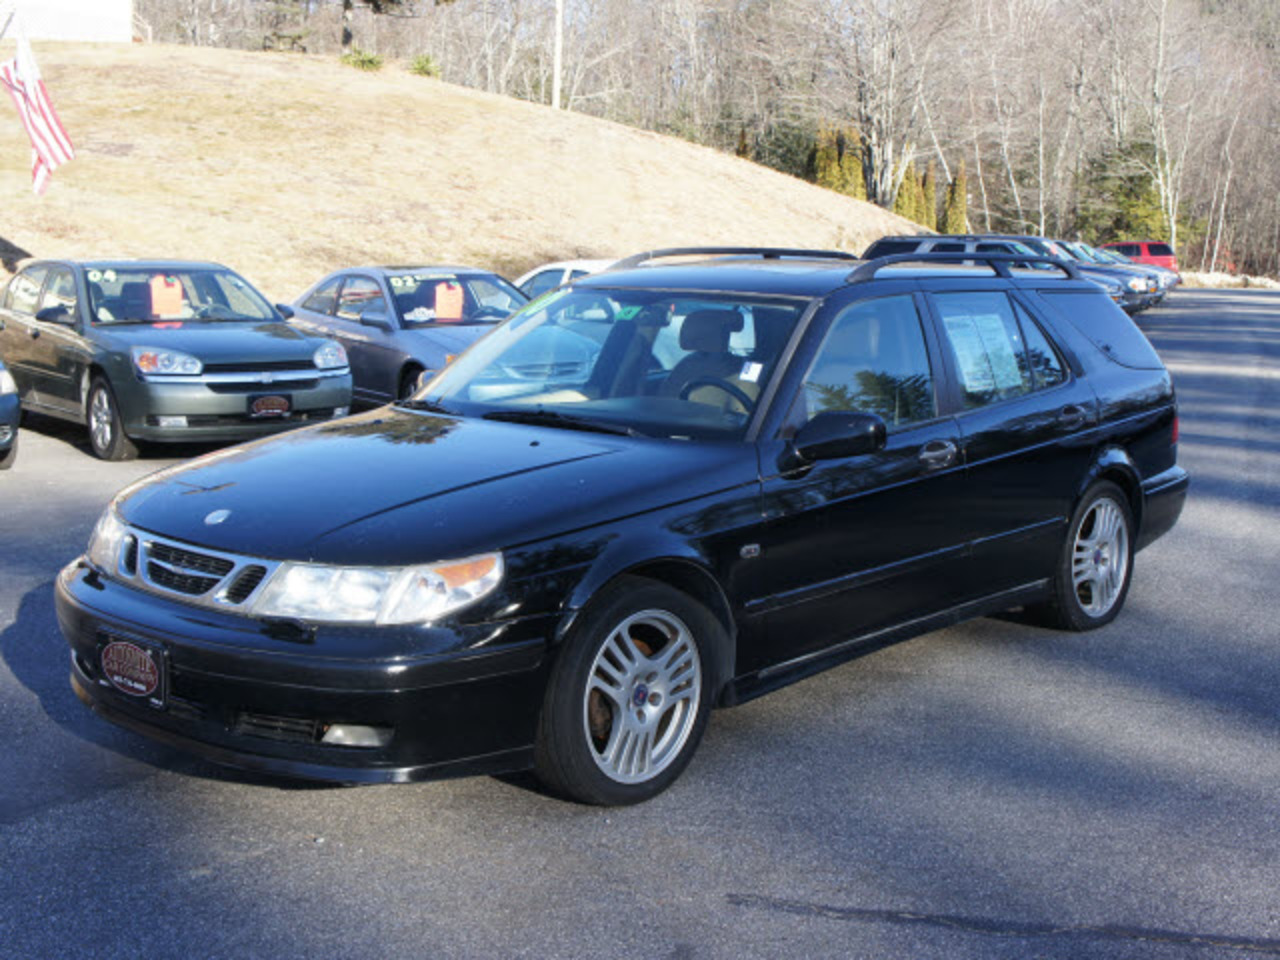 New Hampshire Saab 9-5 Vehicles For Sale - DealerRater